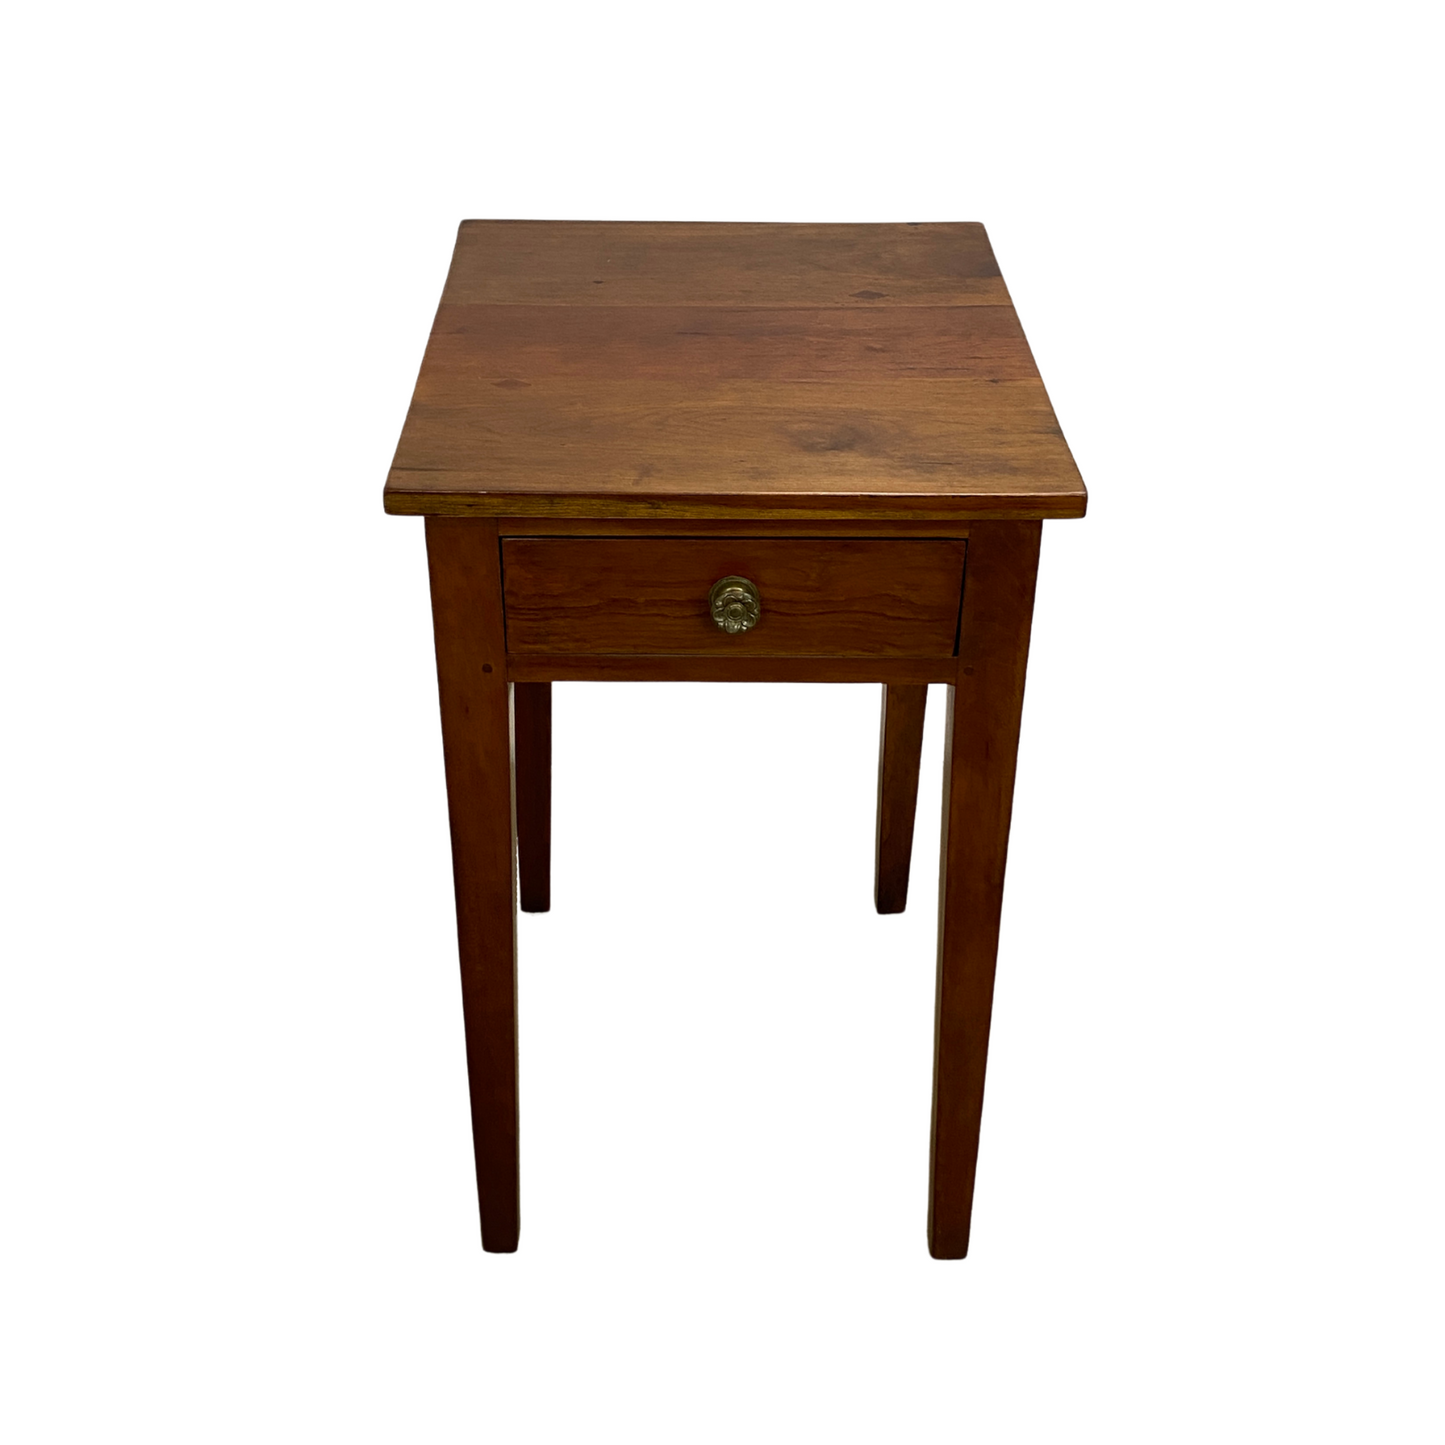 Antique Walnut Pegged Work Table / Night Stand